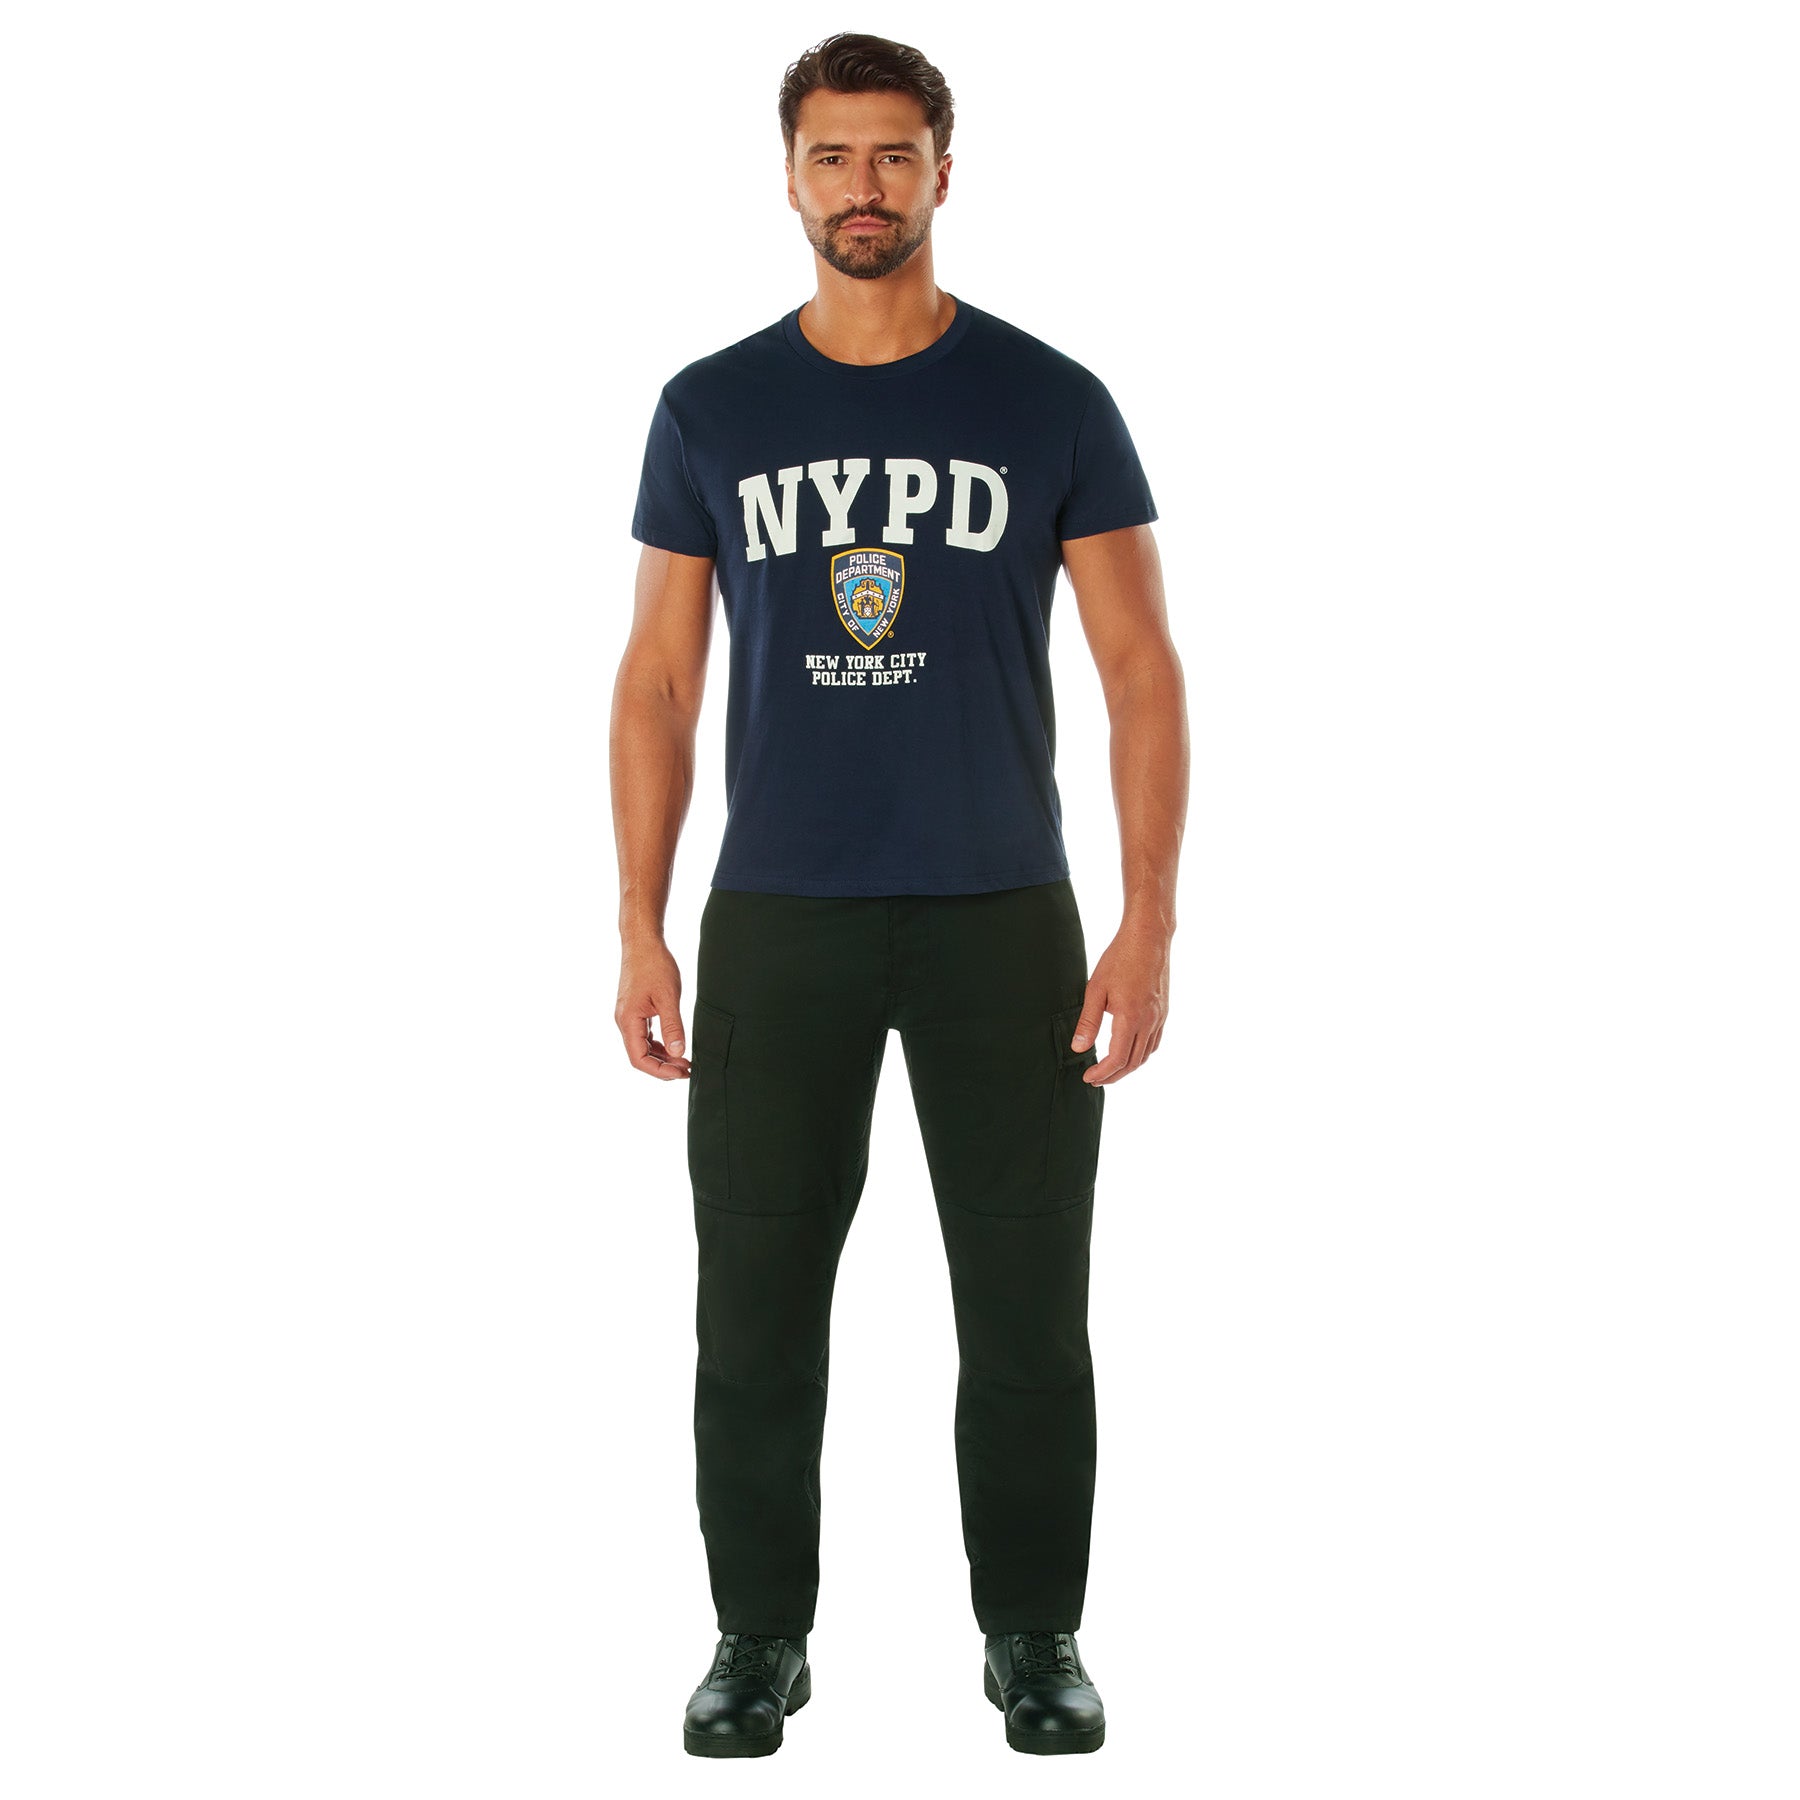 [Public Safety] Cotton Genuine Printed NYPD Emblem T-Shirts